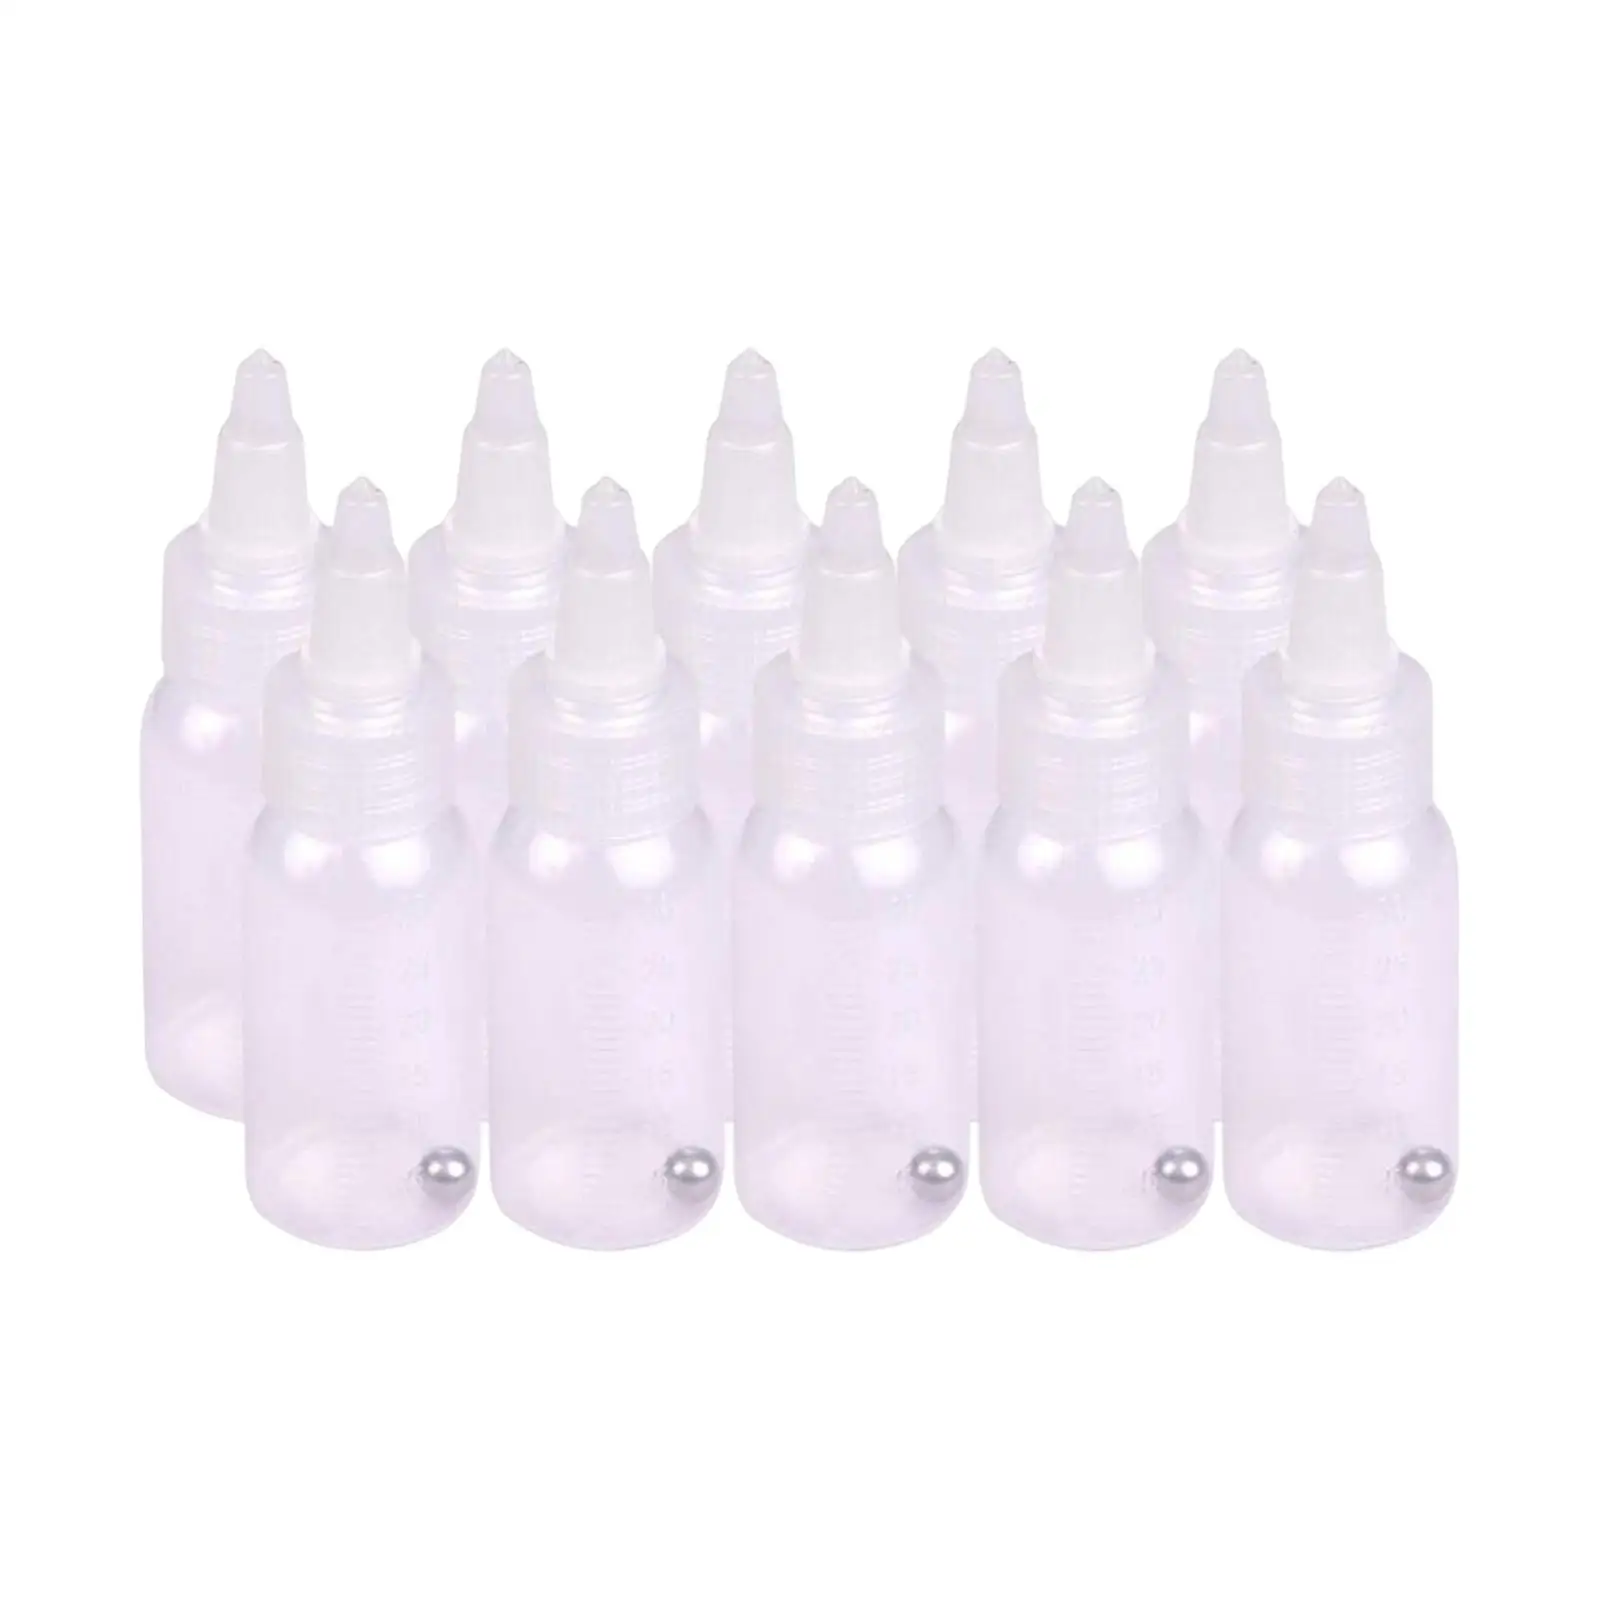 10Pcs 30ml Paint Dropper Bottles with Mixing Bead Mixed for Arts Model Paint